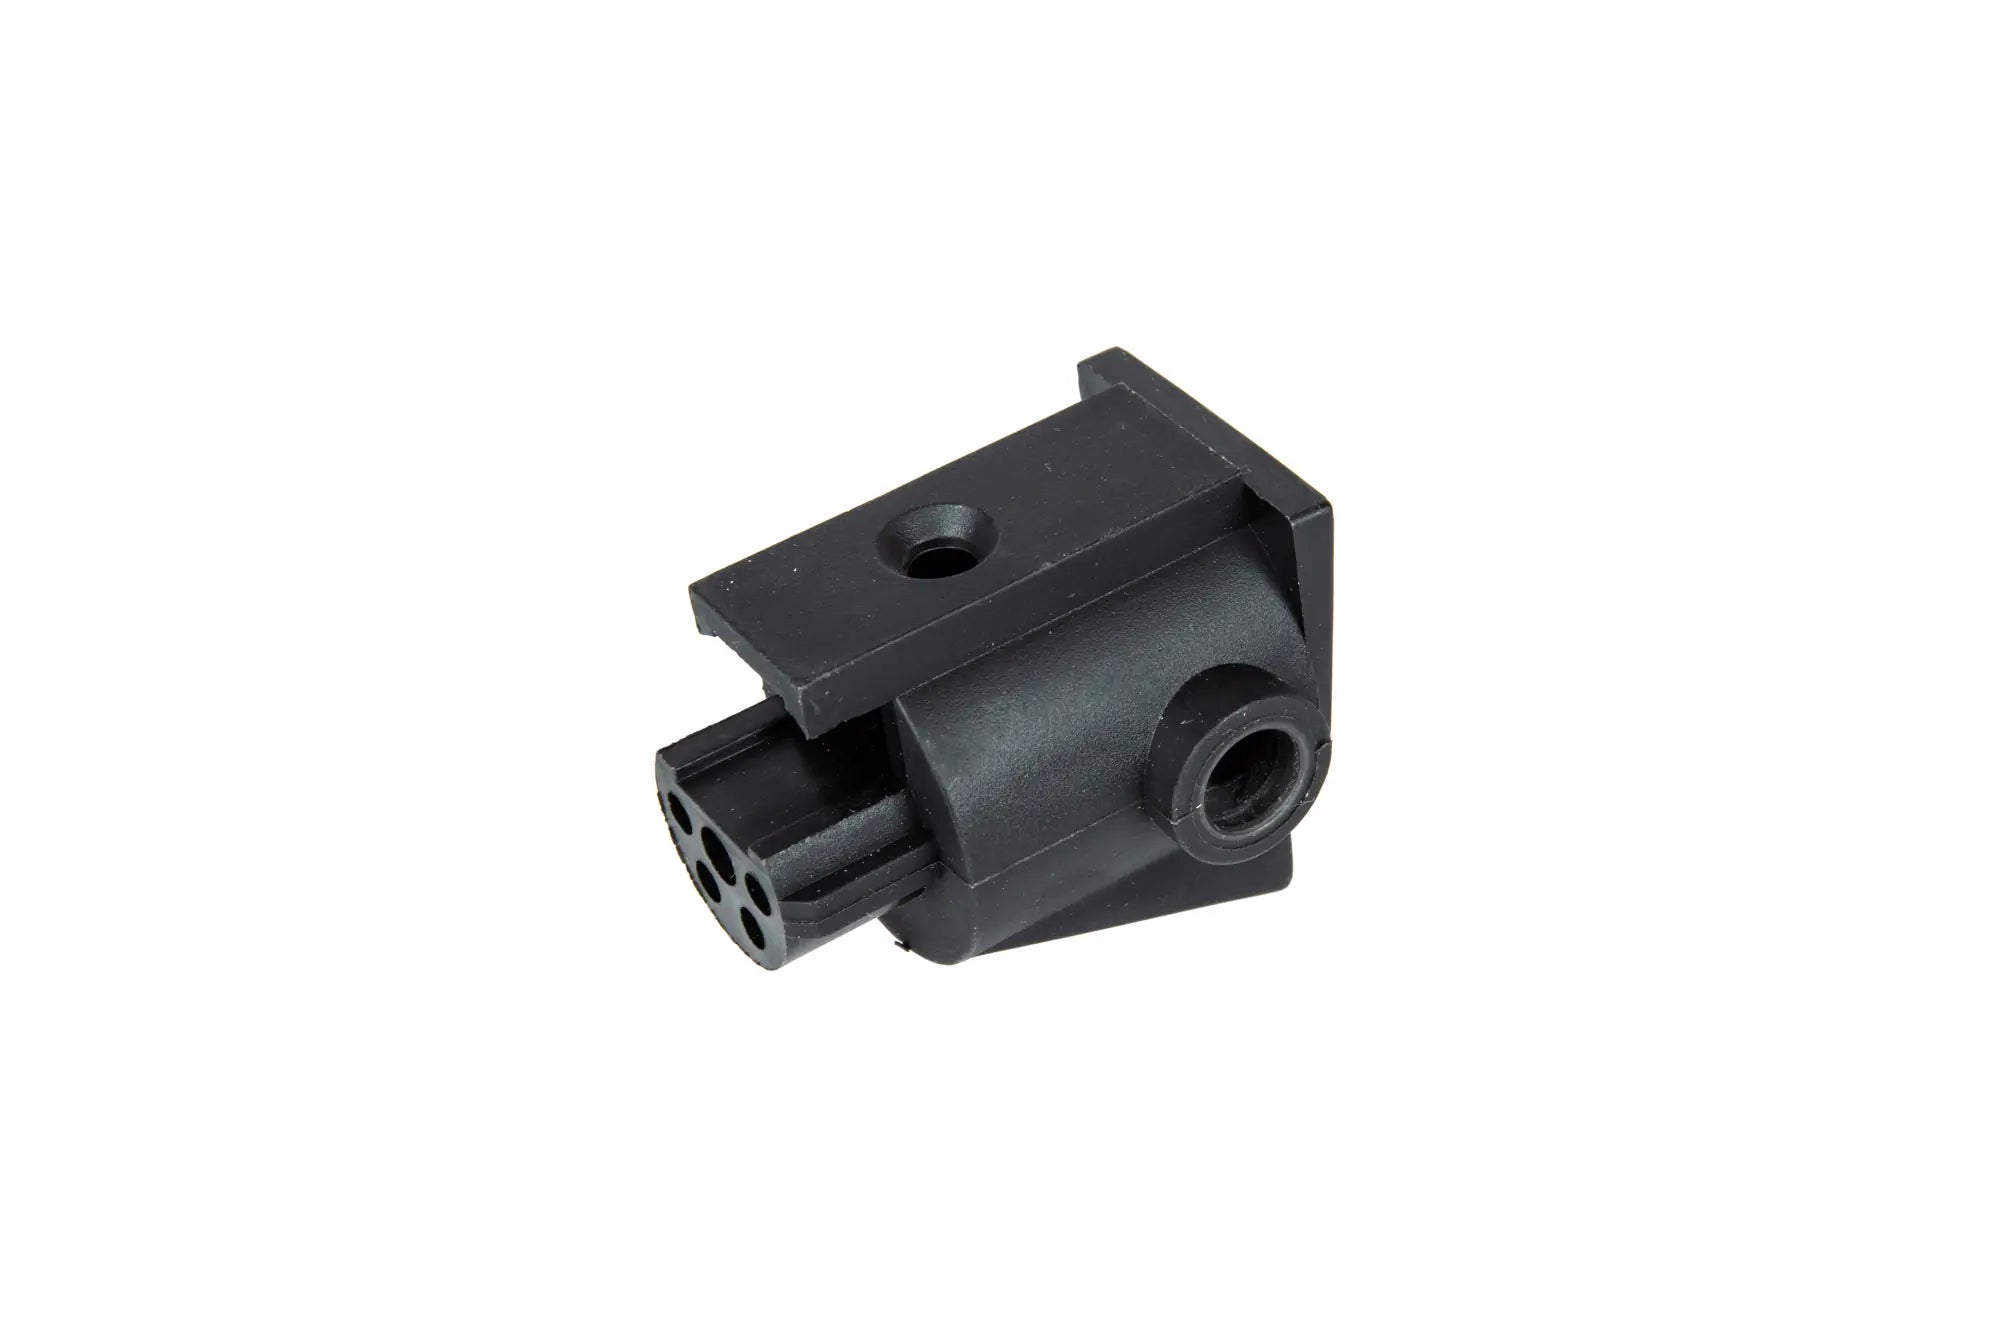 M4 to AK stock adapter-3